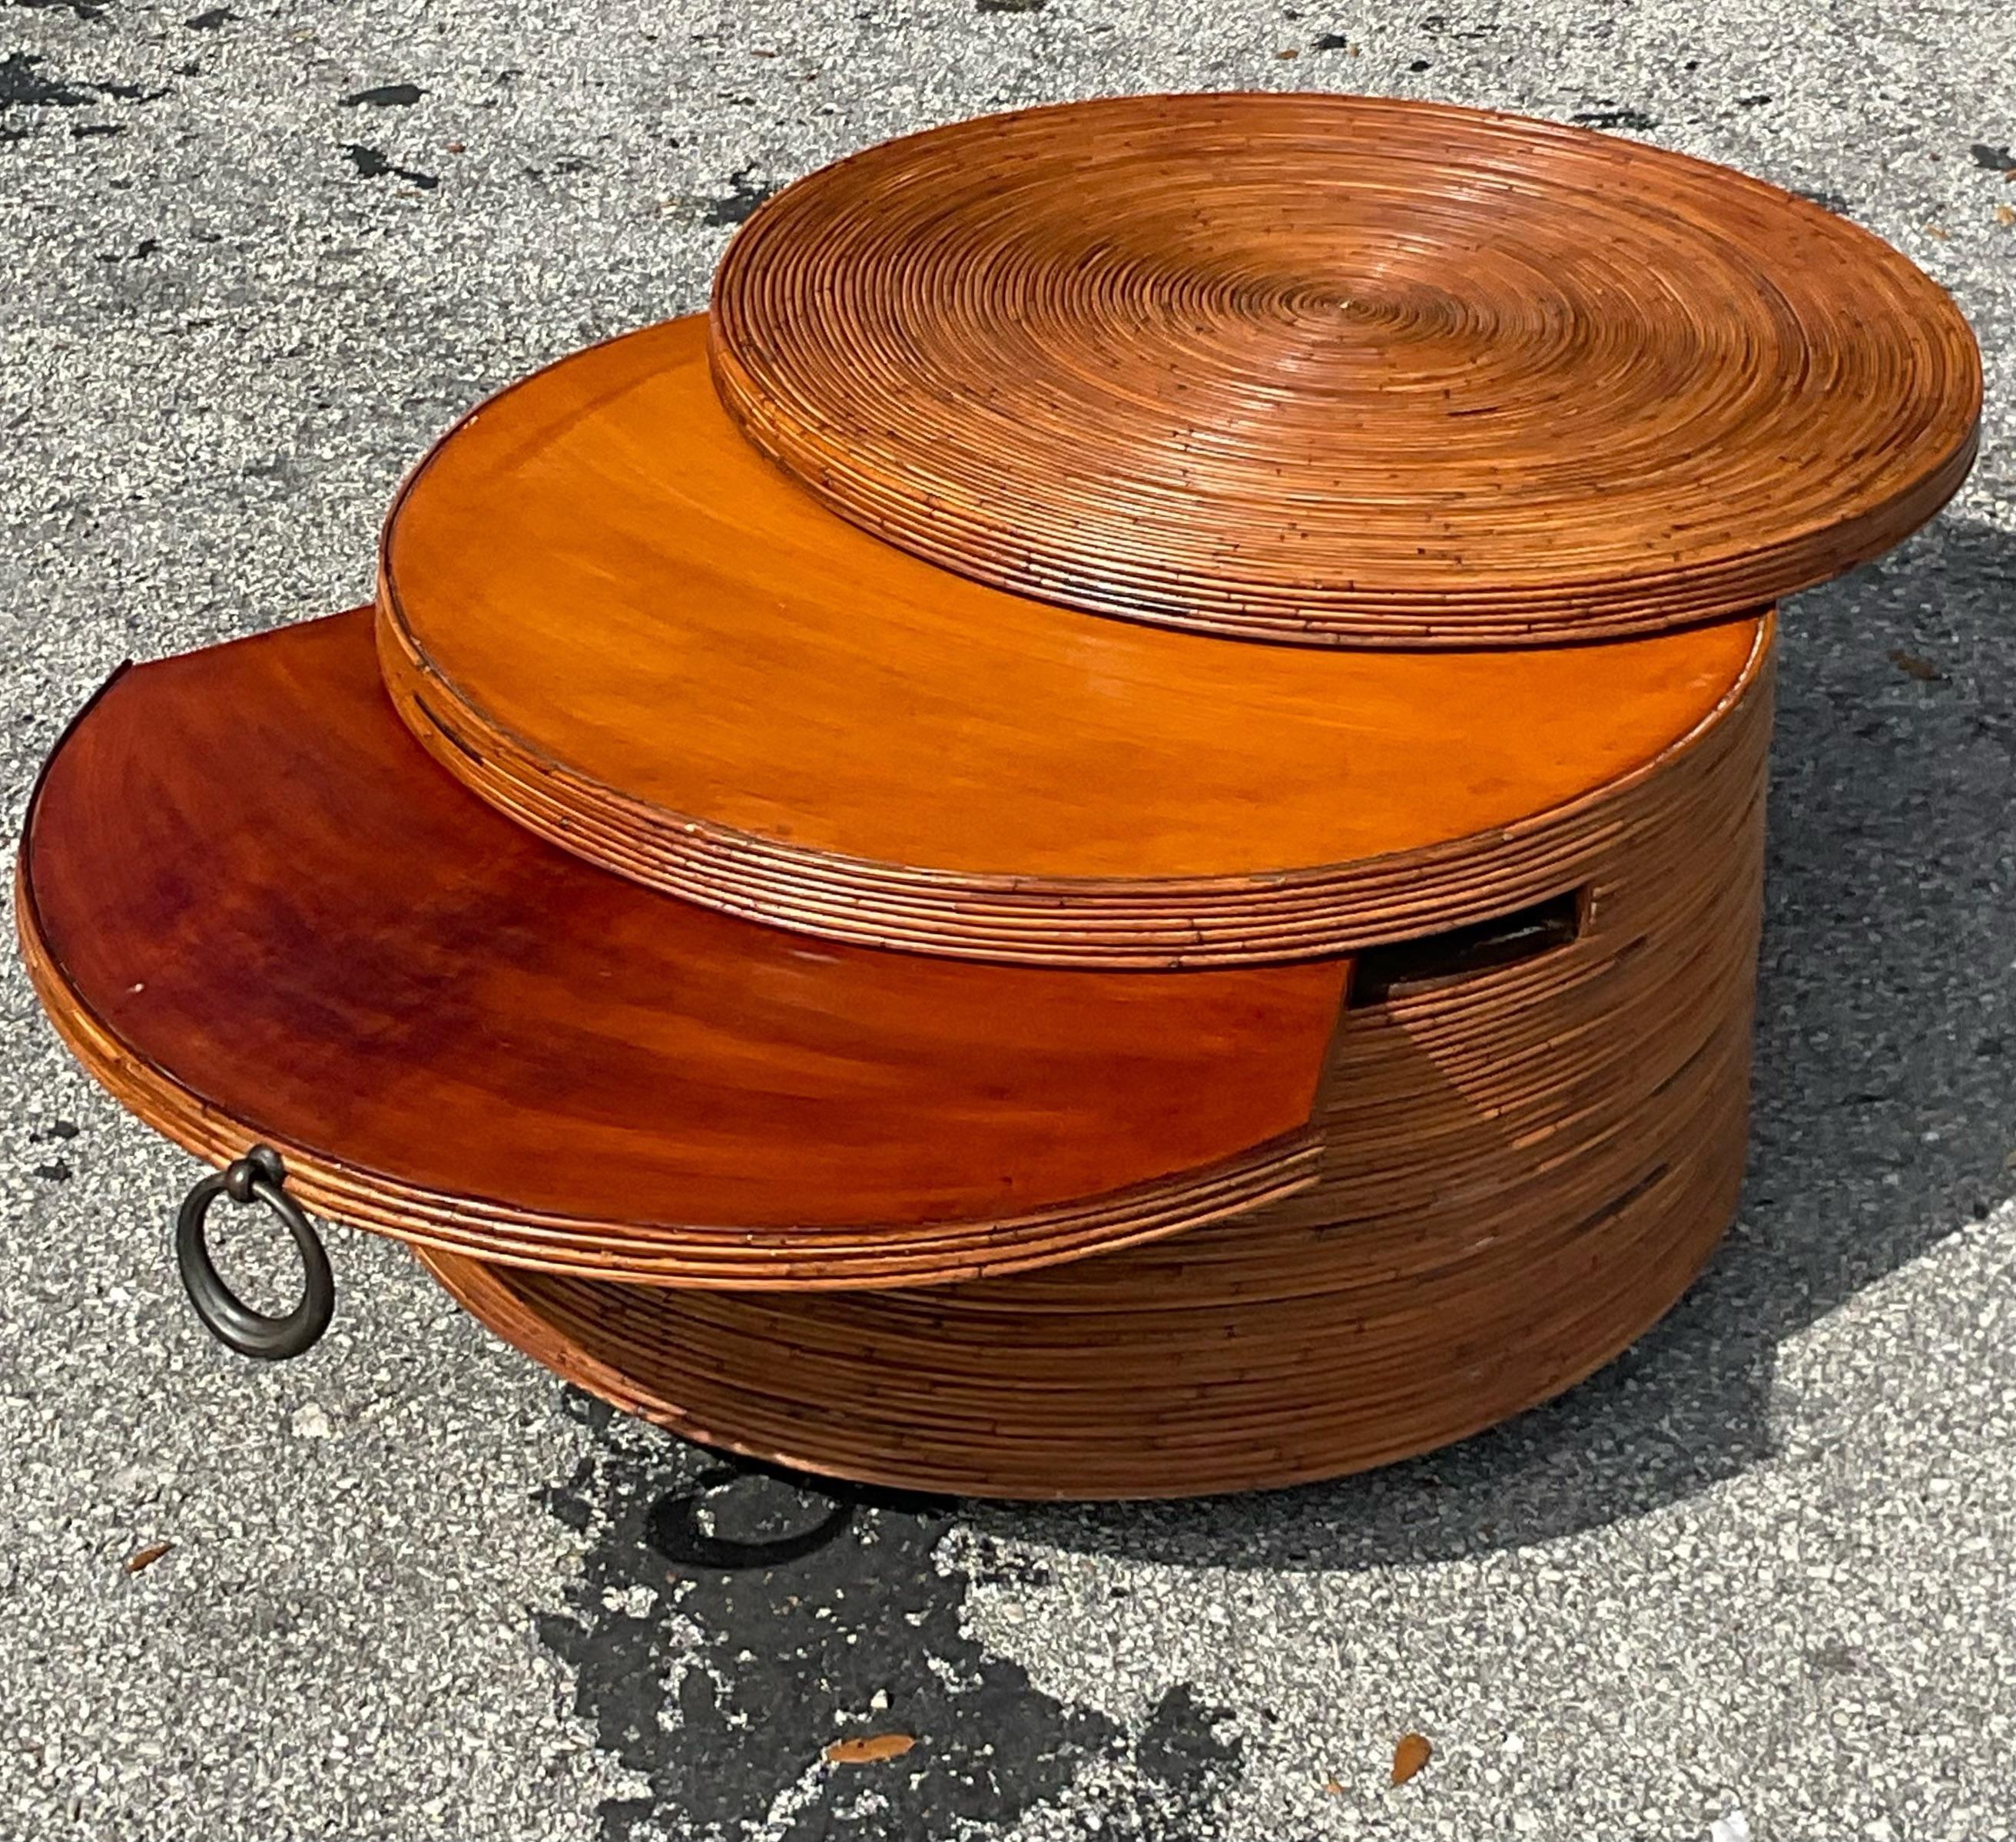 Incredible vintage bamboo pencil reed round coffee cocktail table with a hidden extension and swivel top to expand for extra space. Acquired from a Palm Beach estate.